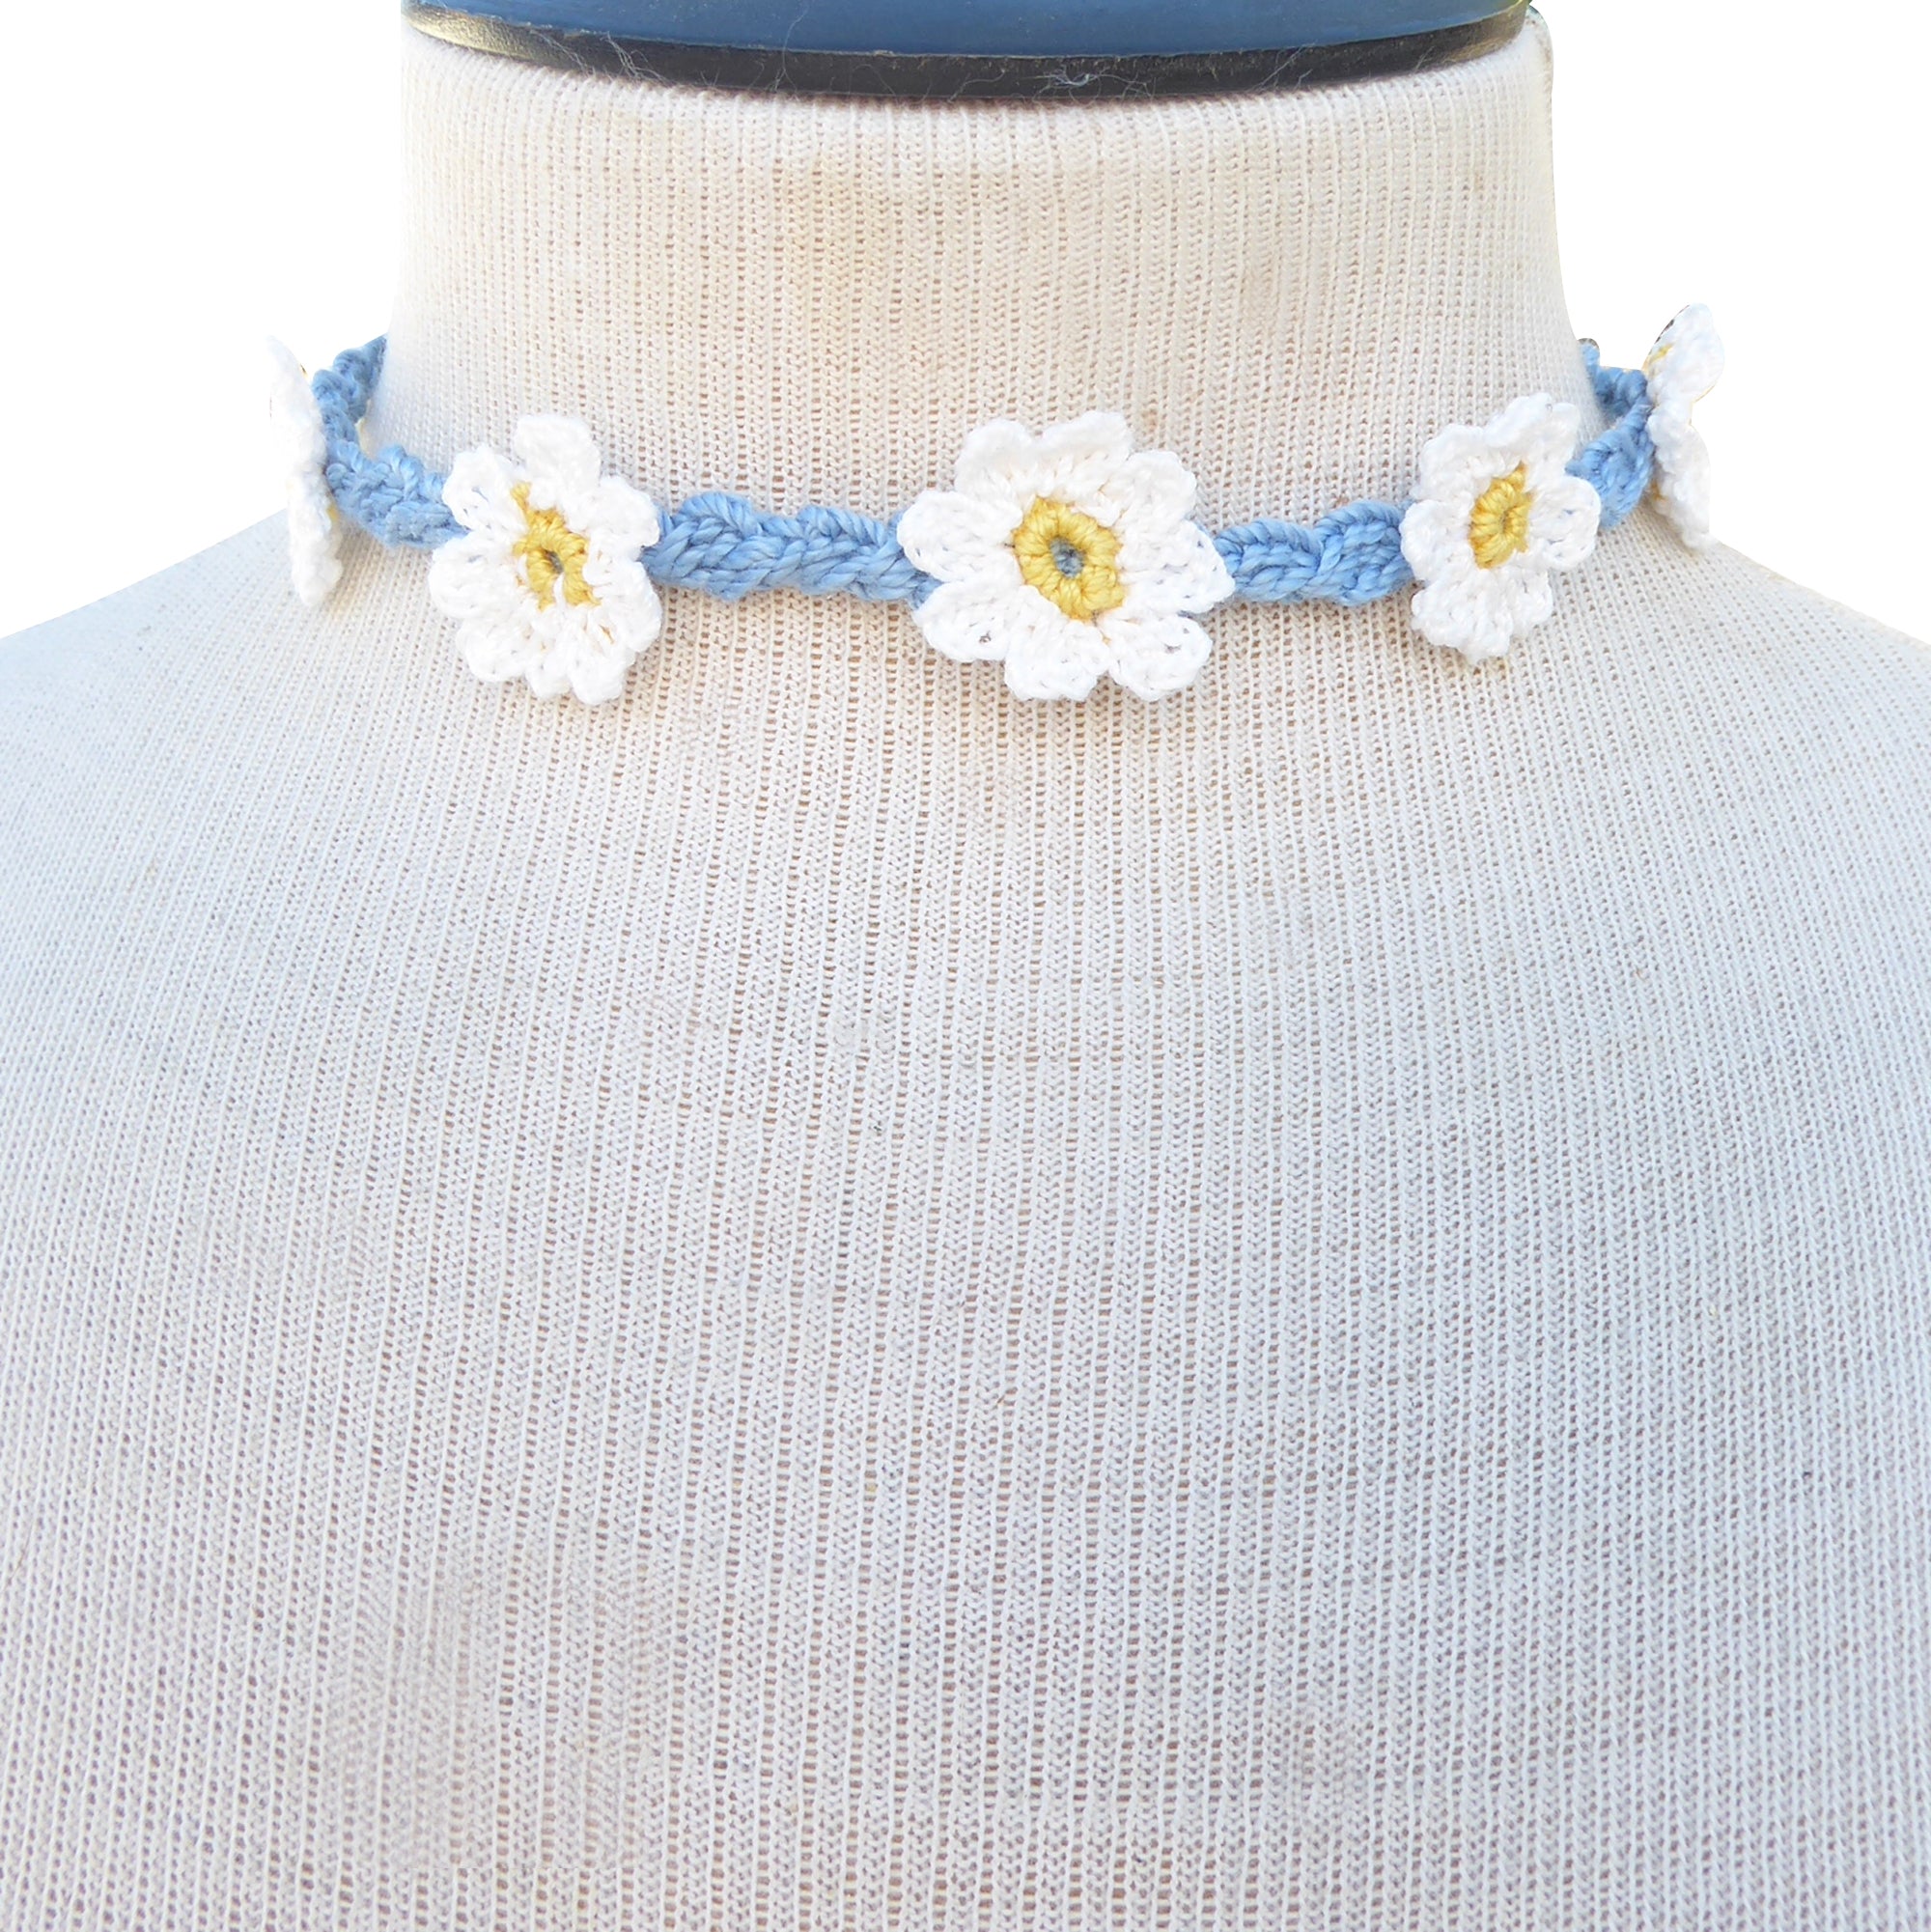 Blue and white flower crochet earring and necklace set by Jenny Dayco 9